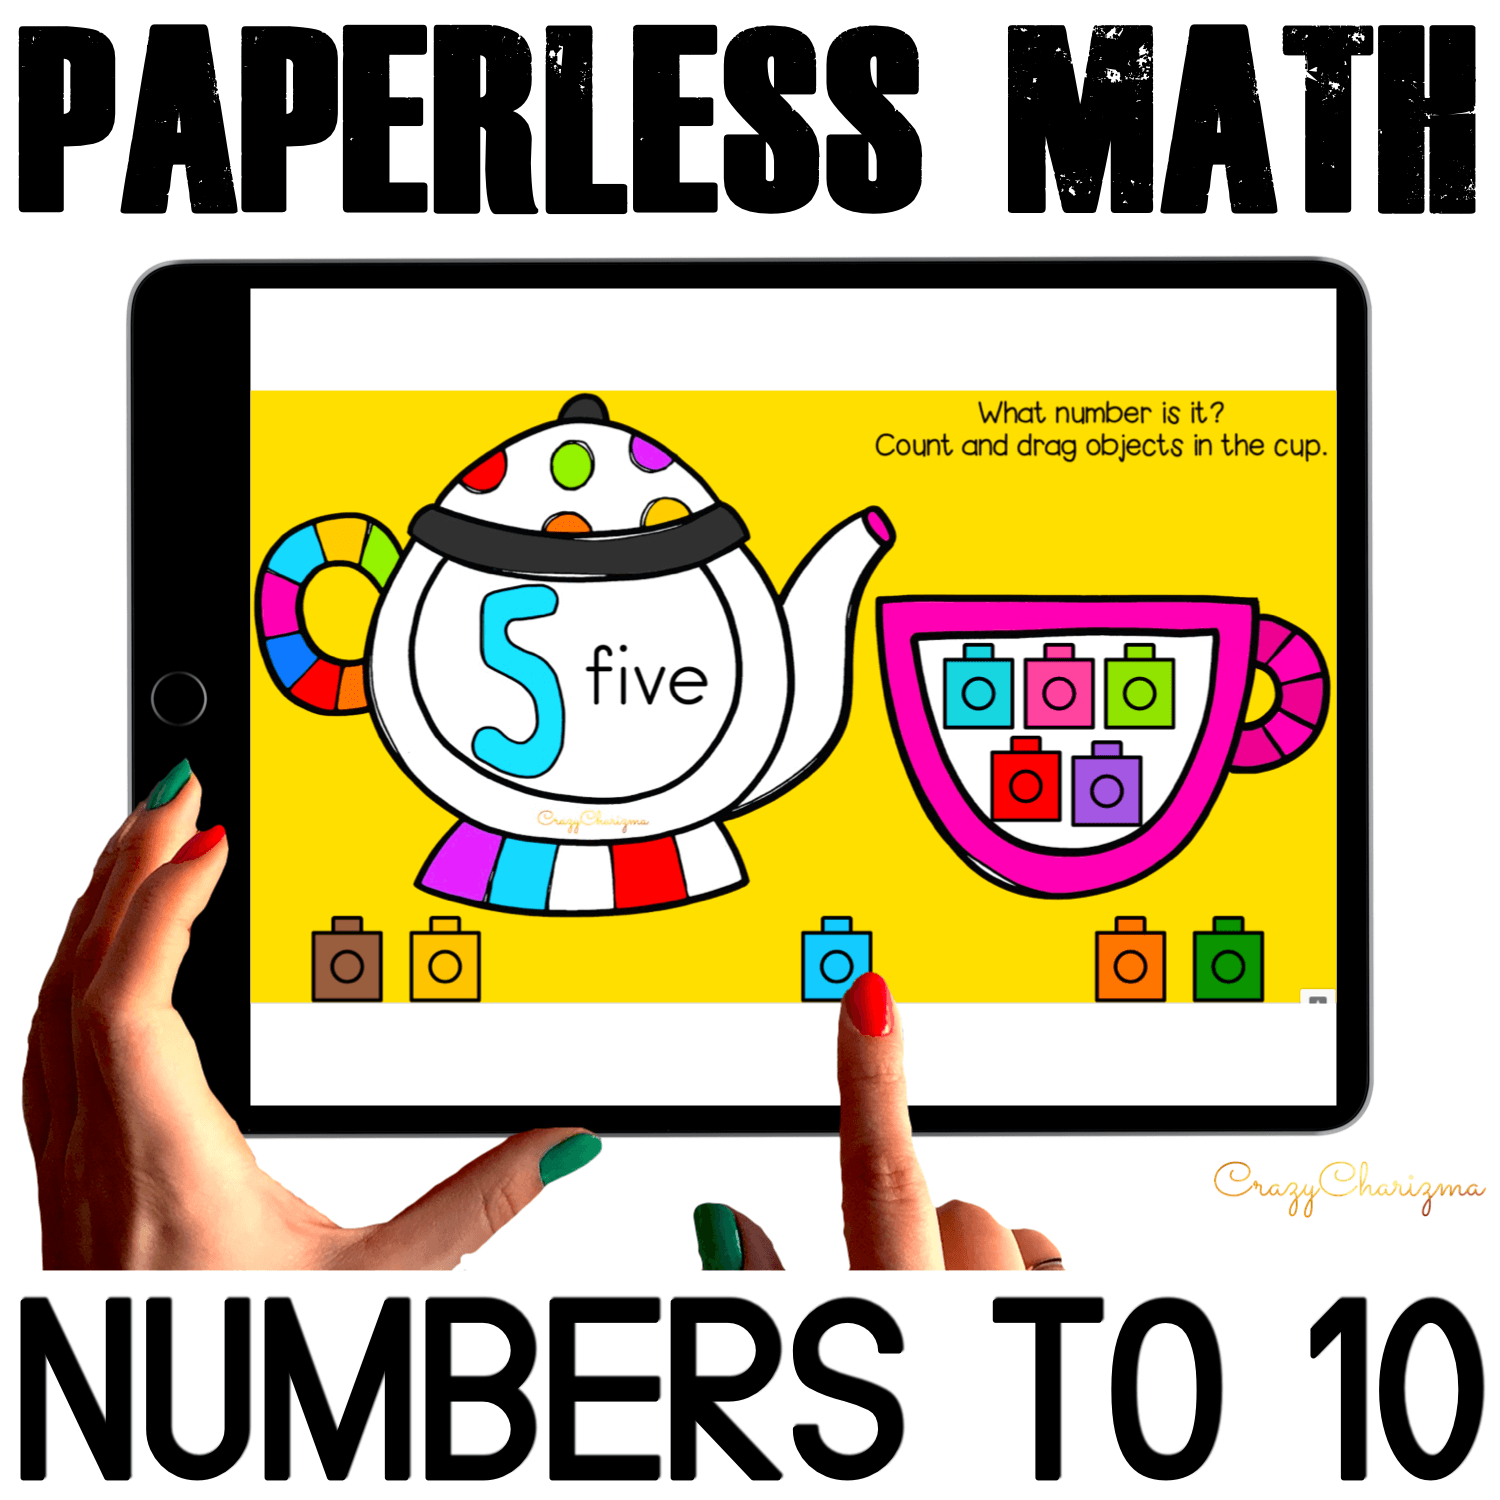 Need engaging Numbers to 10 activities? Have fun with this Google Slides set. Perfect to use for centers, assessment, independent practice, early finishers, homework, group work, as well as during distance learning or hybrid.